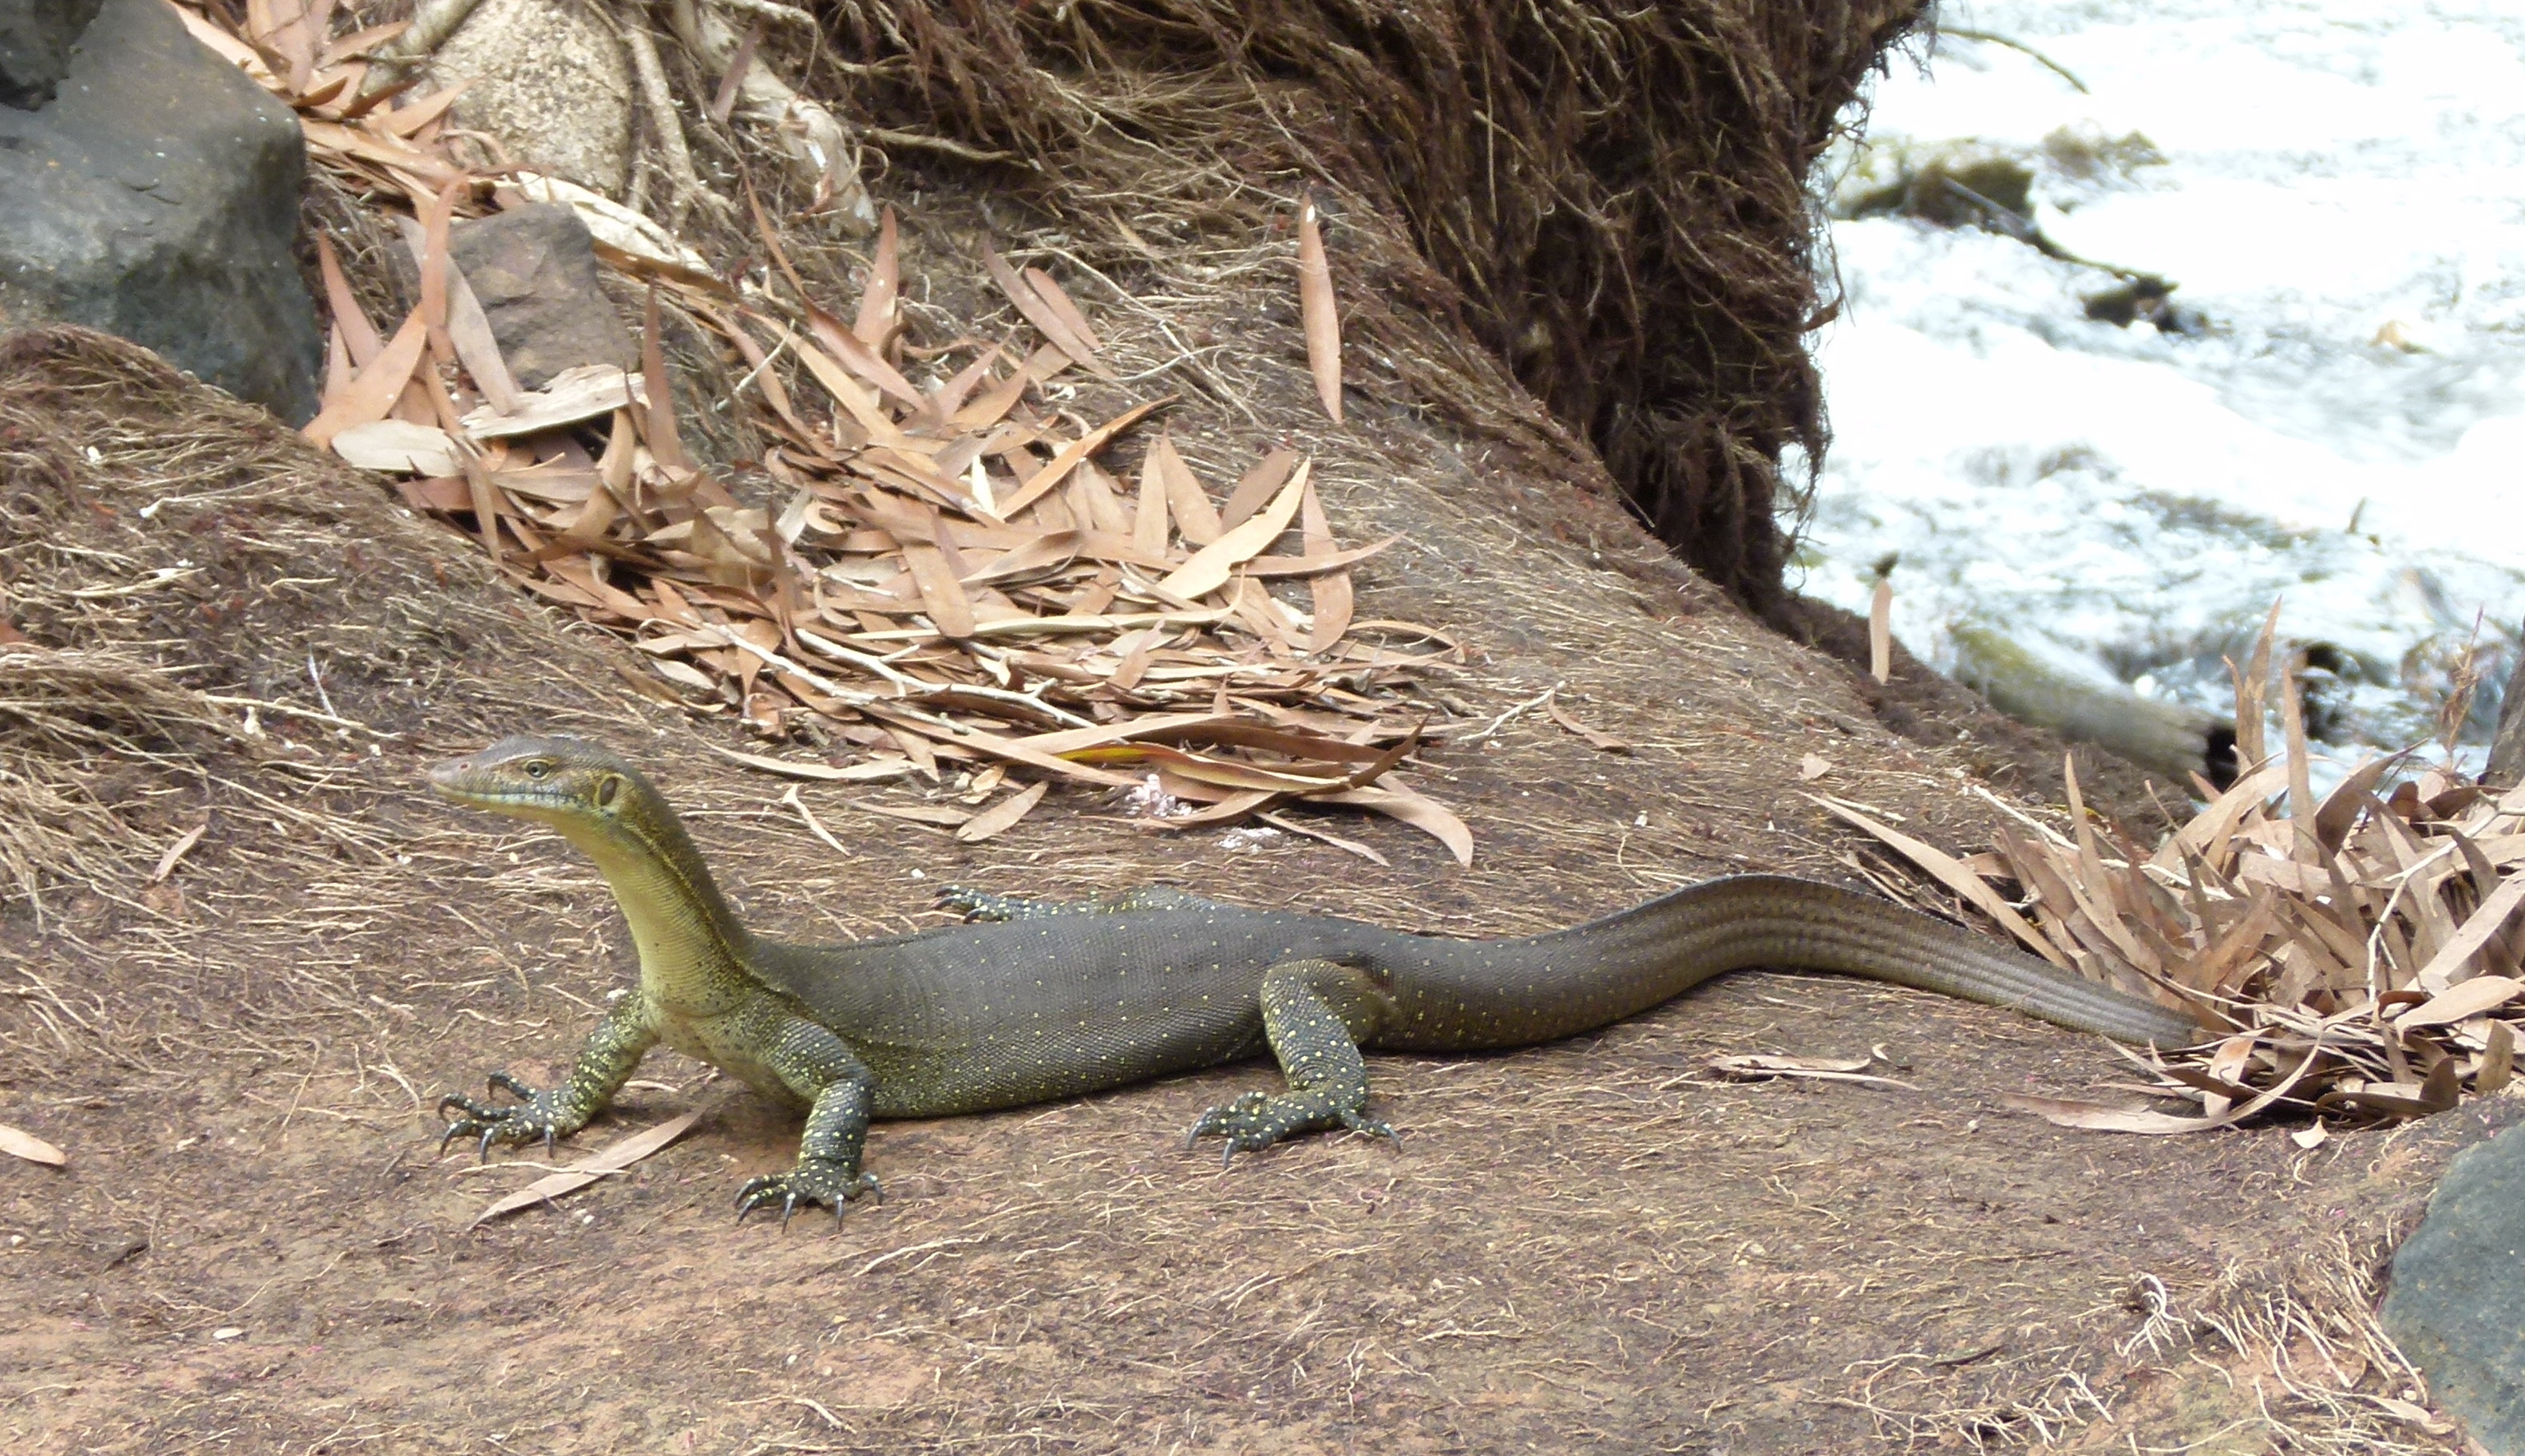 Merton's Water Monitor on teh bank of the Adelaide River, Marrakai Track © Mike Jarvis